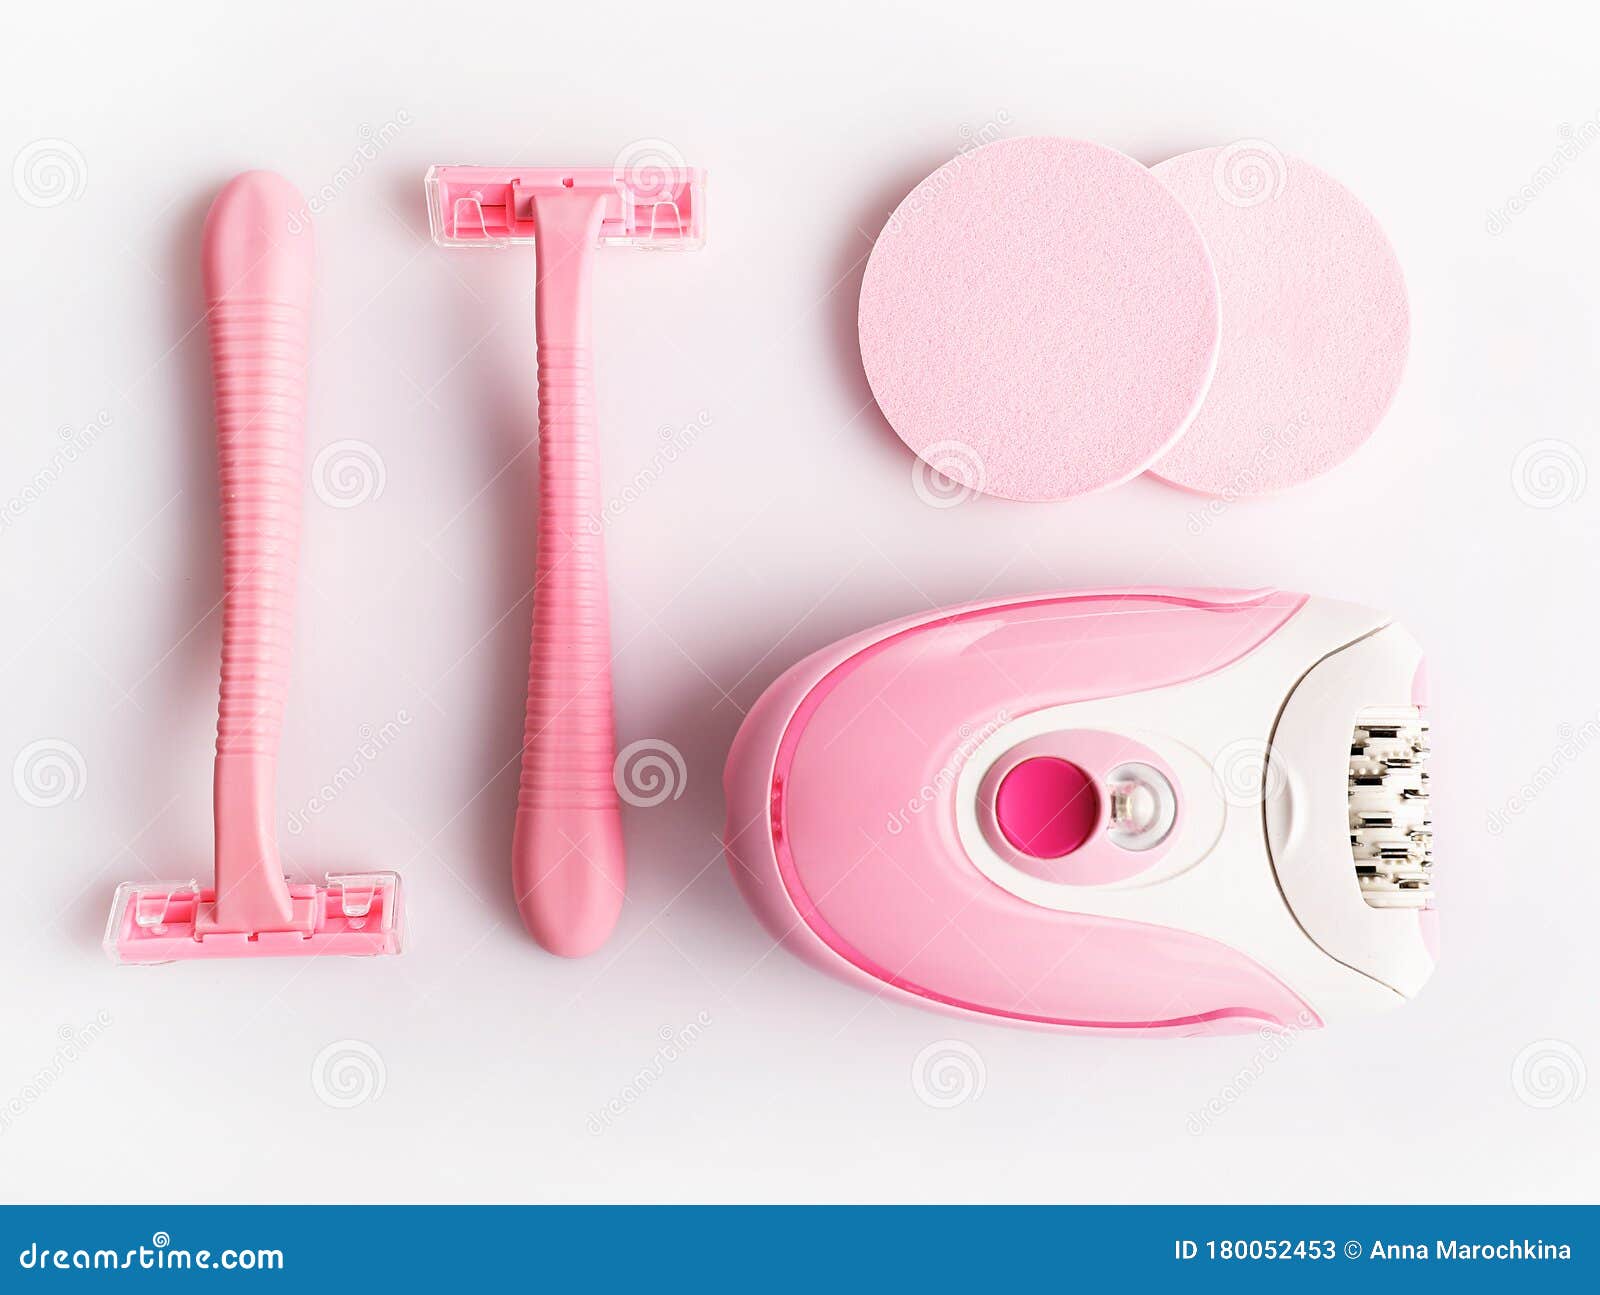 Pink Shaving and Hair Removal Products Stock Image - Image of procedure,  epilator: 180052453